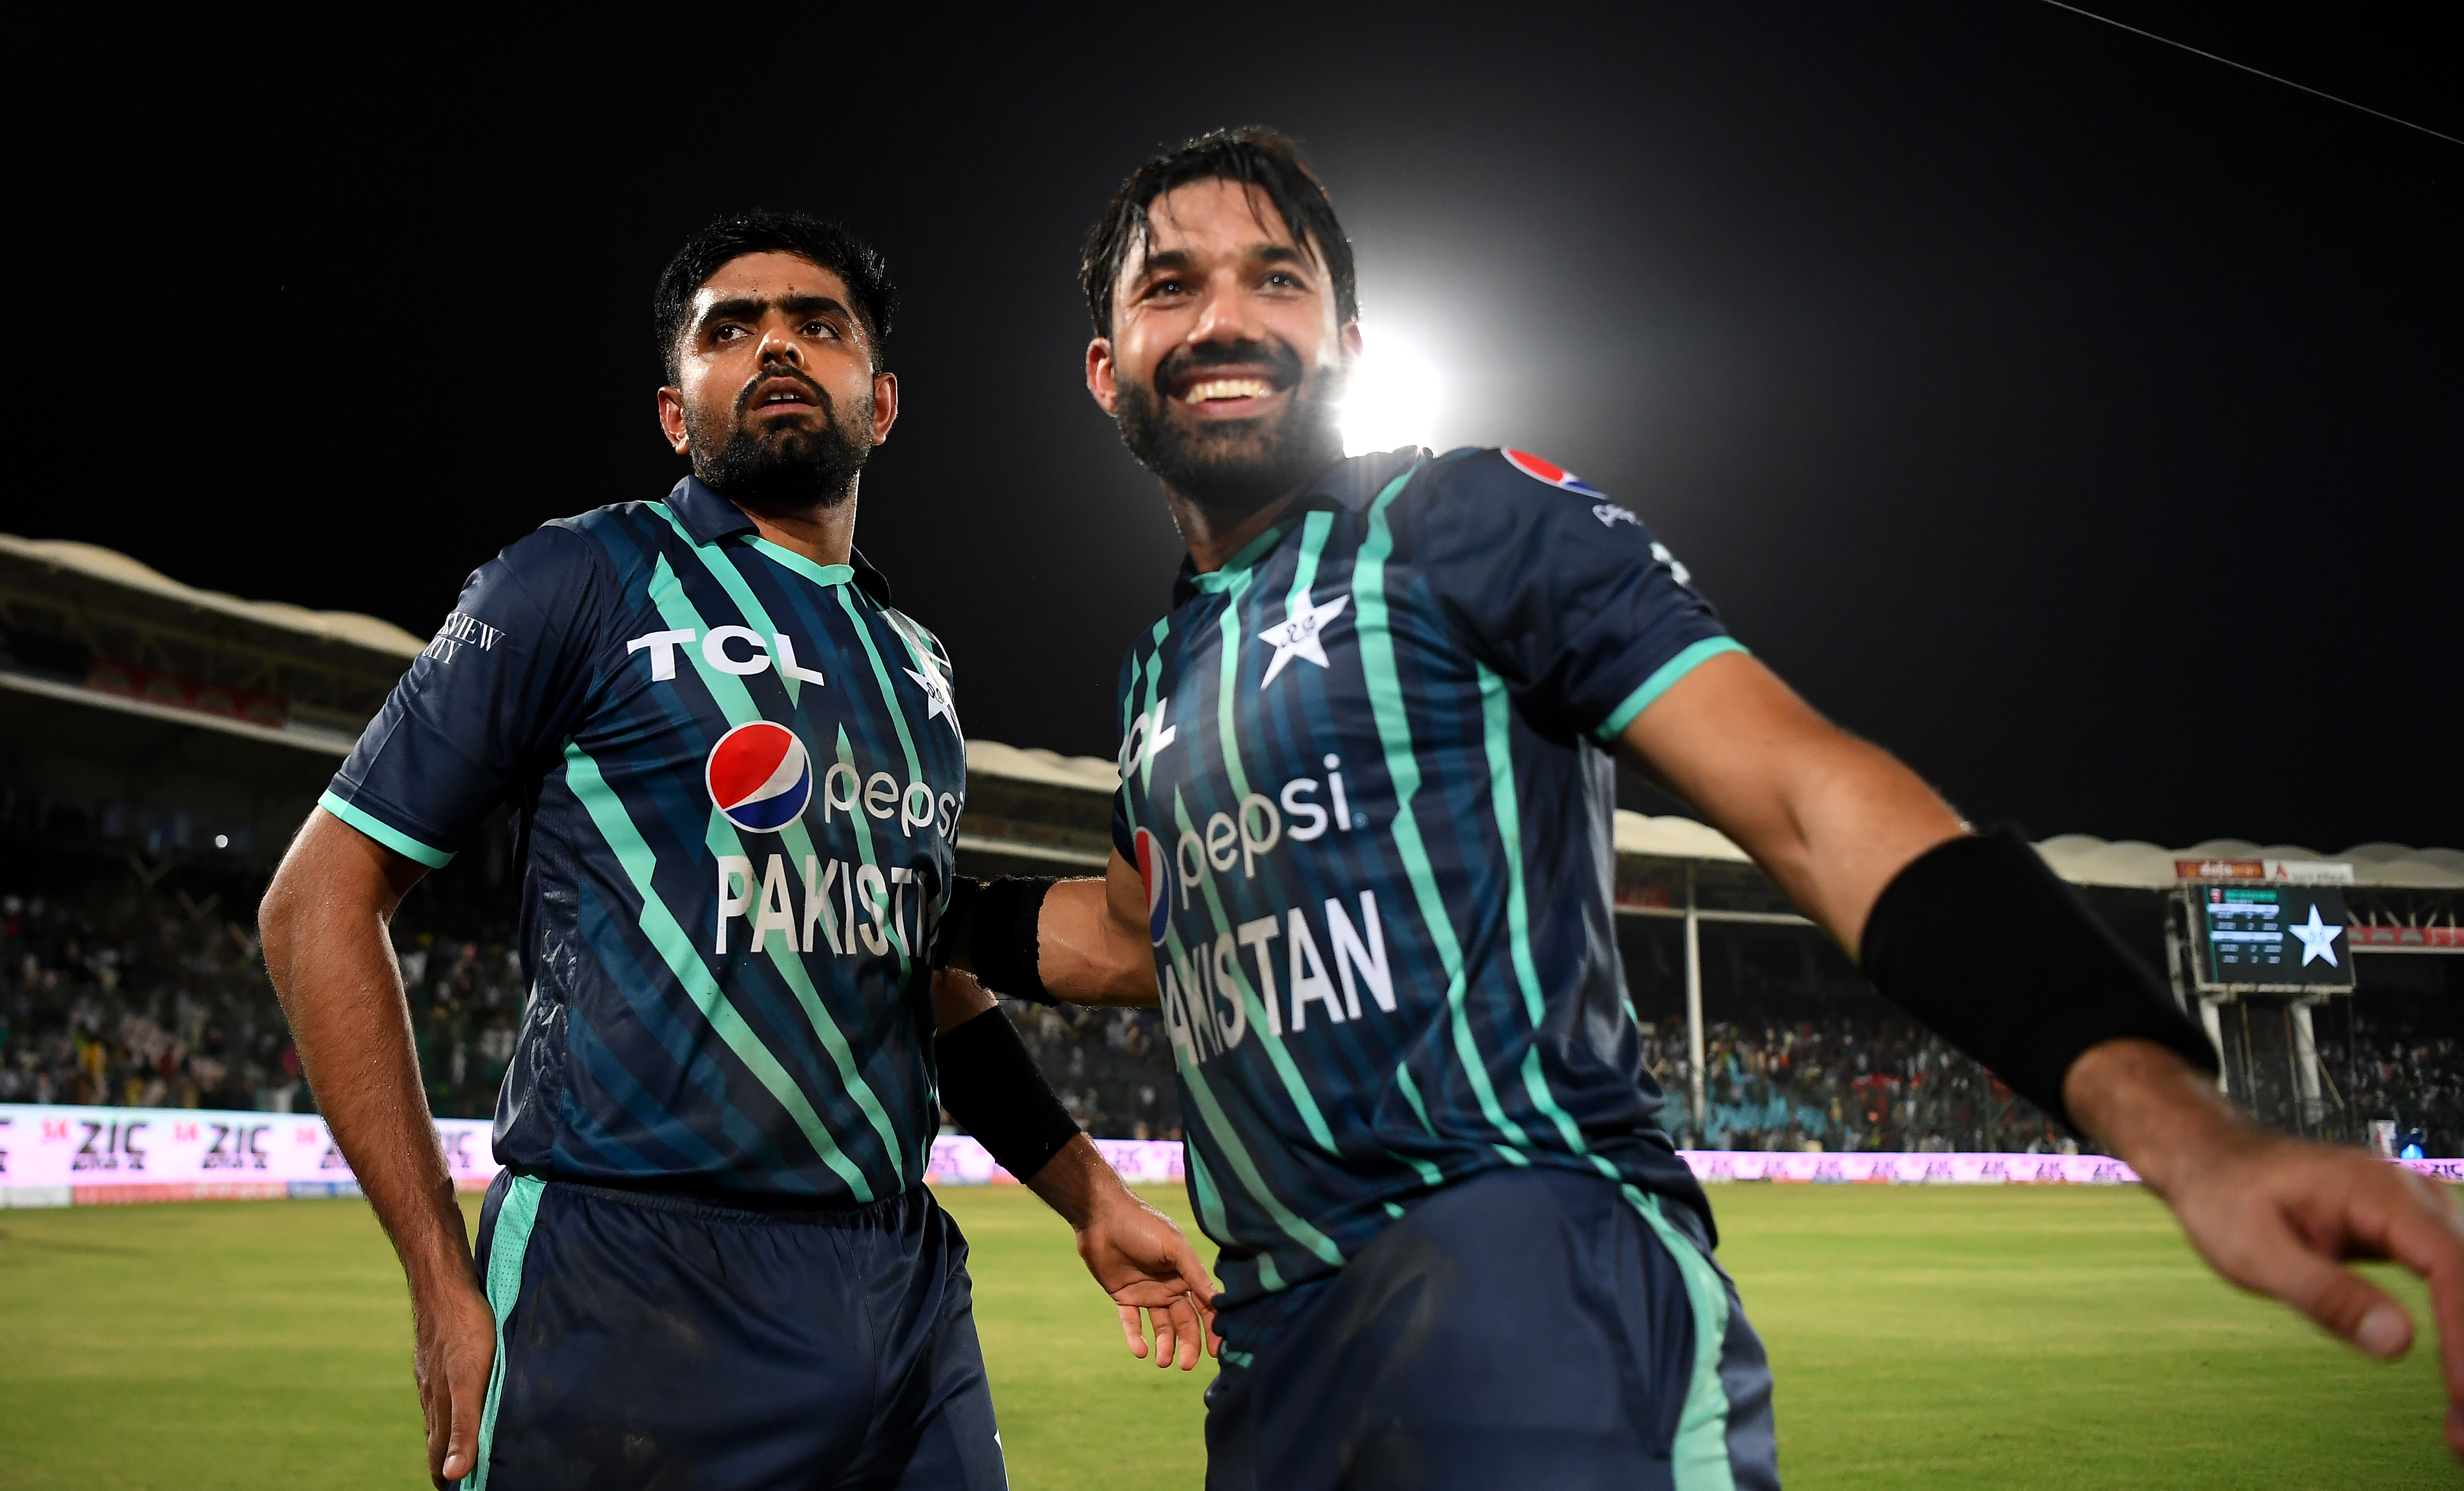 Babar Azam and Mohammad Rizwan of Pakistan celebrate victory after the 2nd IT20 match between Pakistan and England on September 22, 2022 in Karachi, Pakistan. (Photo by Alex Davidson/Getty Images)